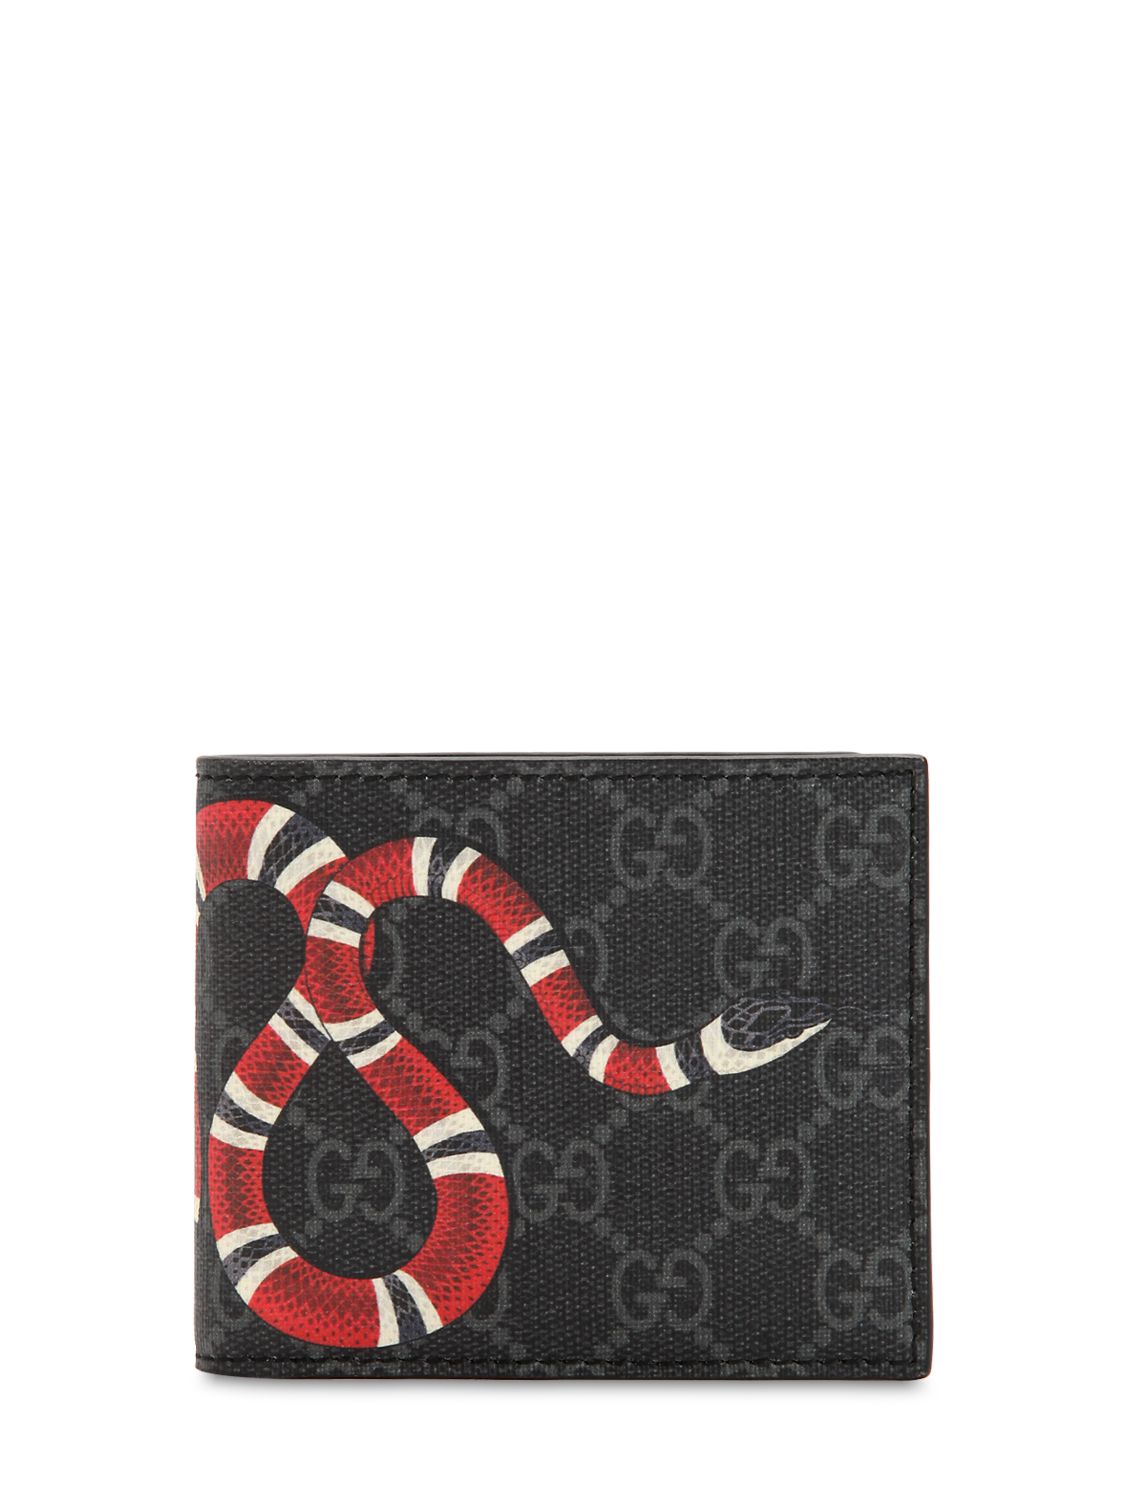 Snake Printed Coated Canvas Wallet